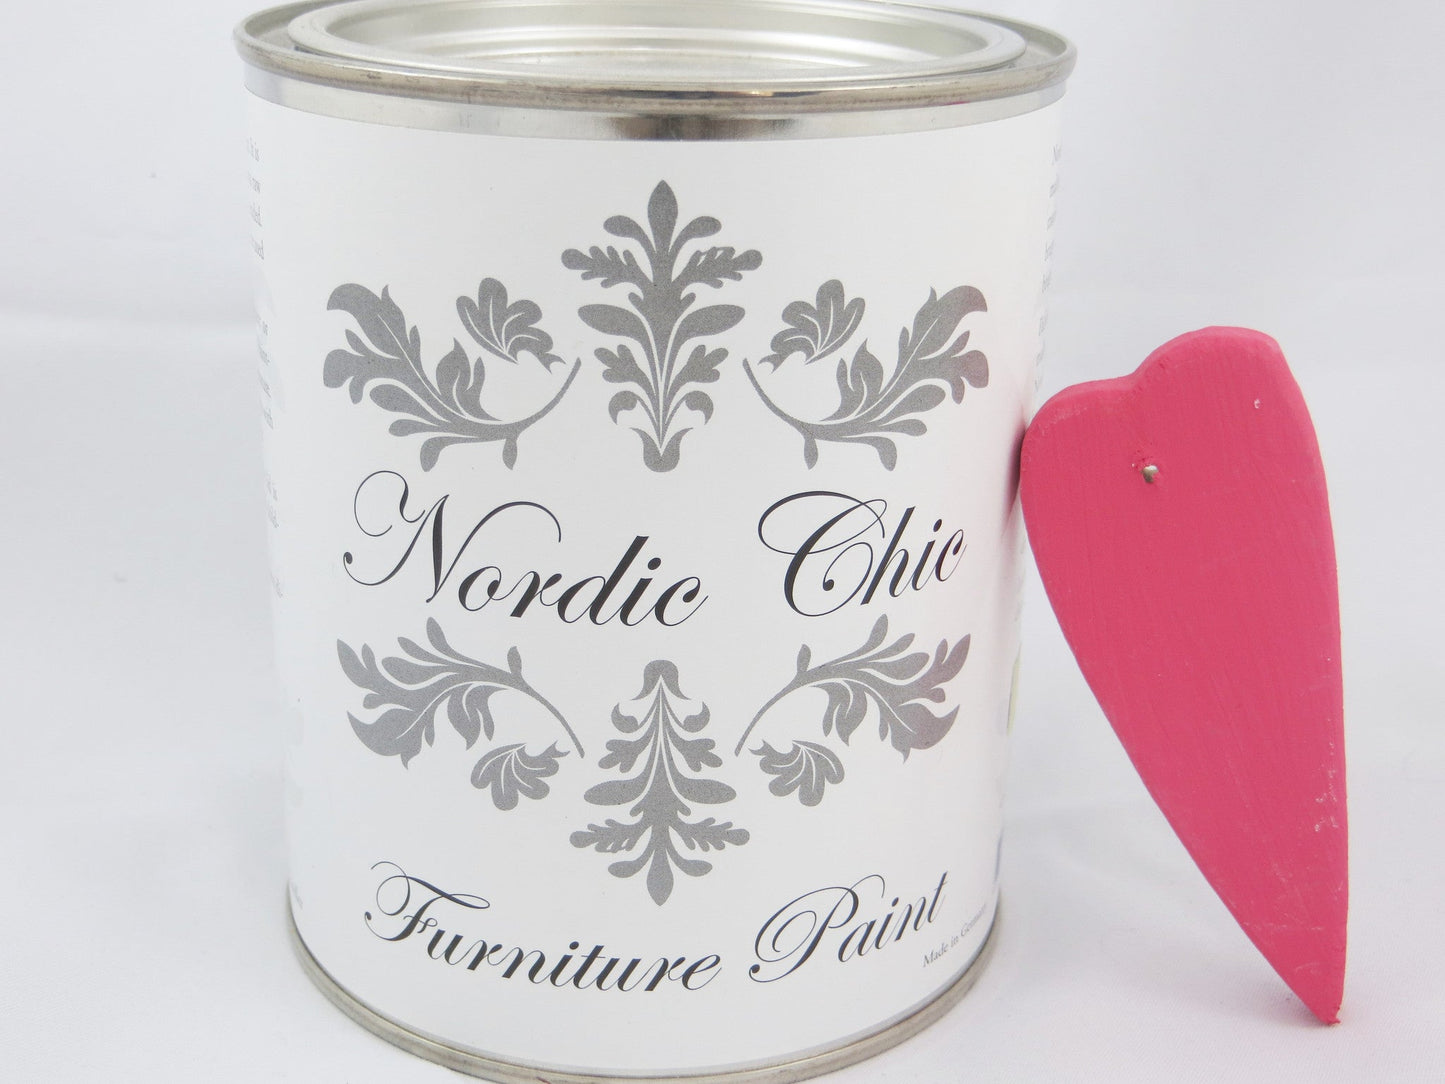 Nordic Chic Furniture Paint - Hotlips - Nordic Chic®